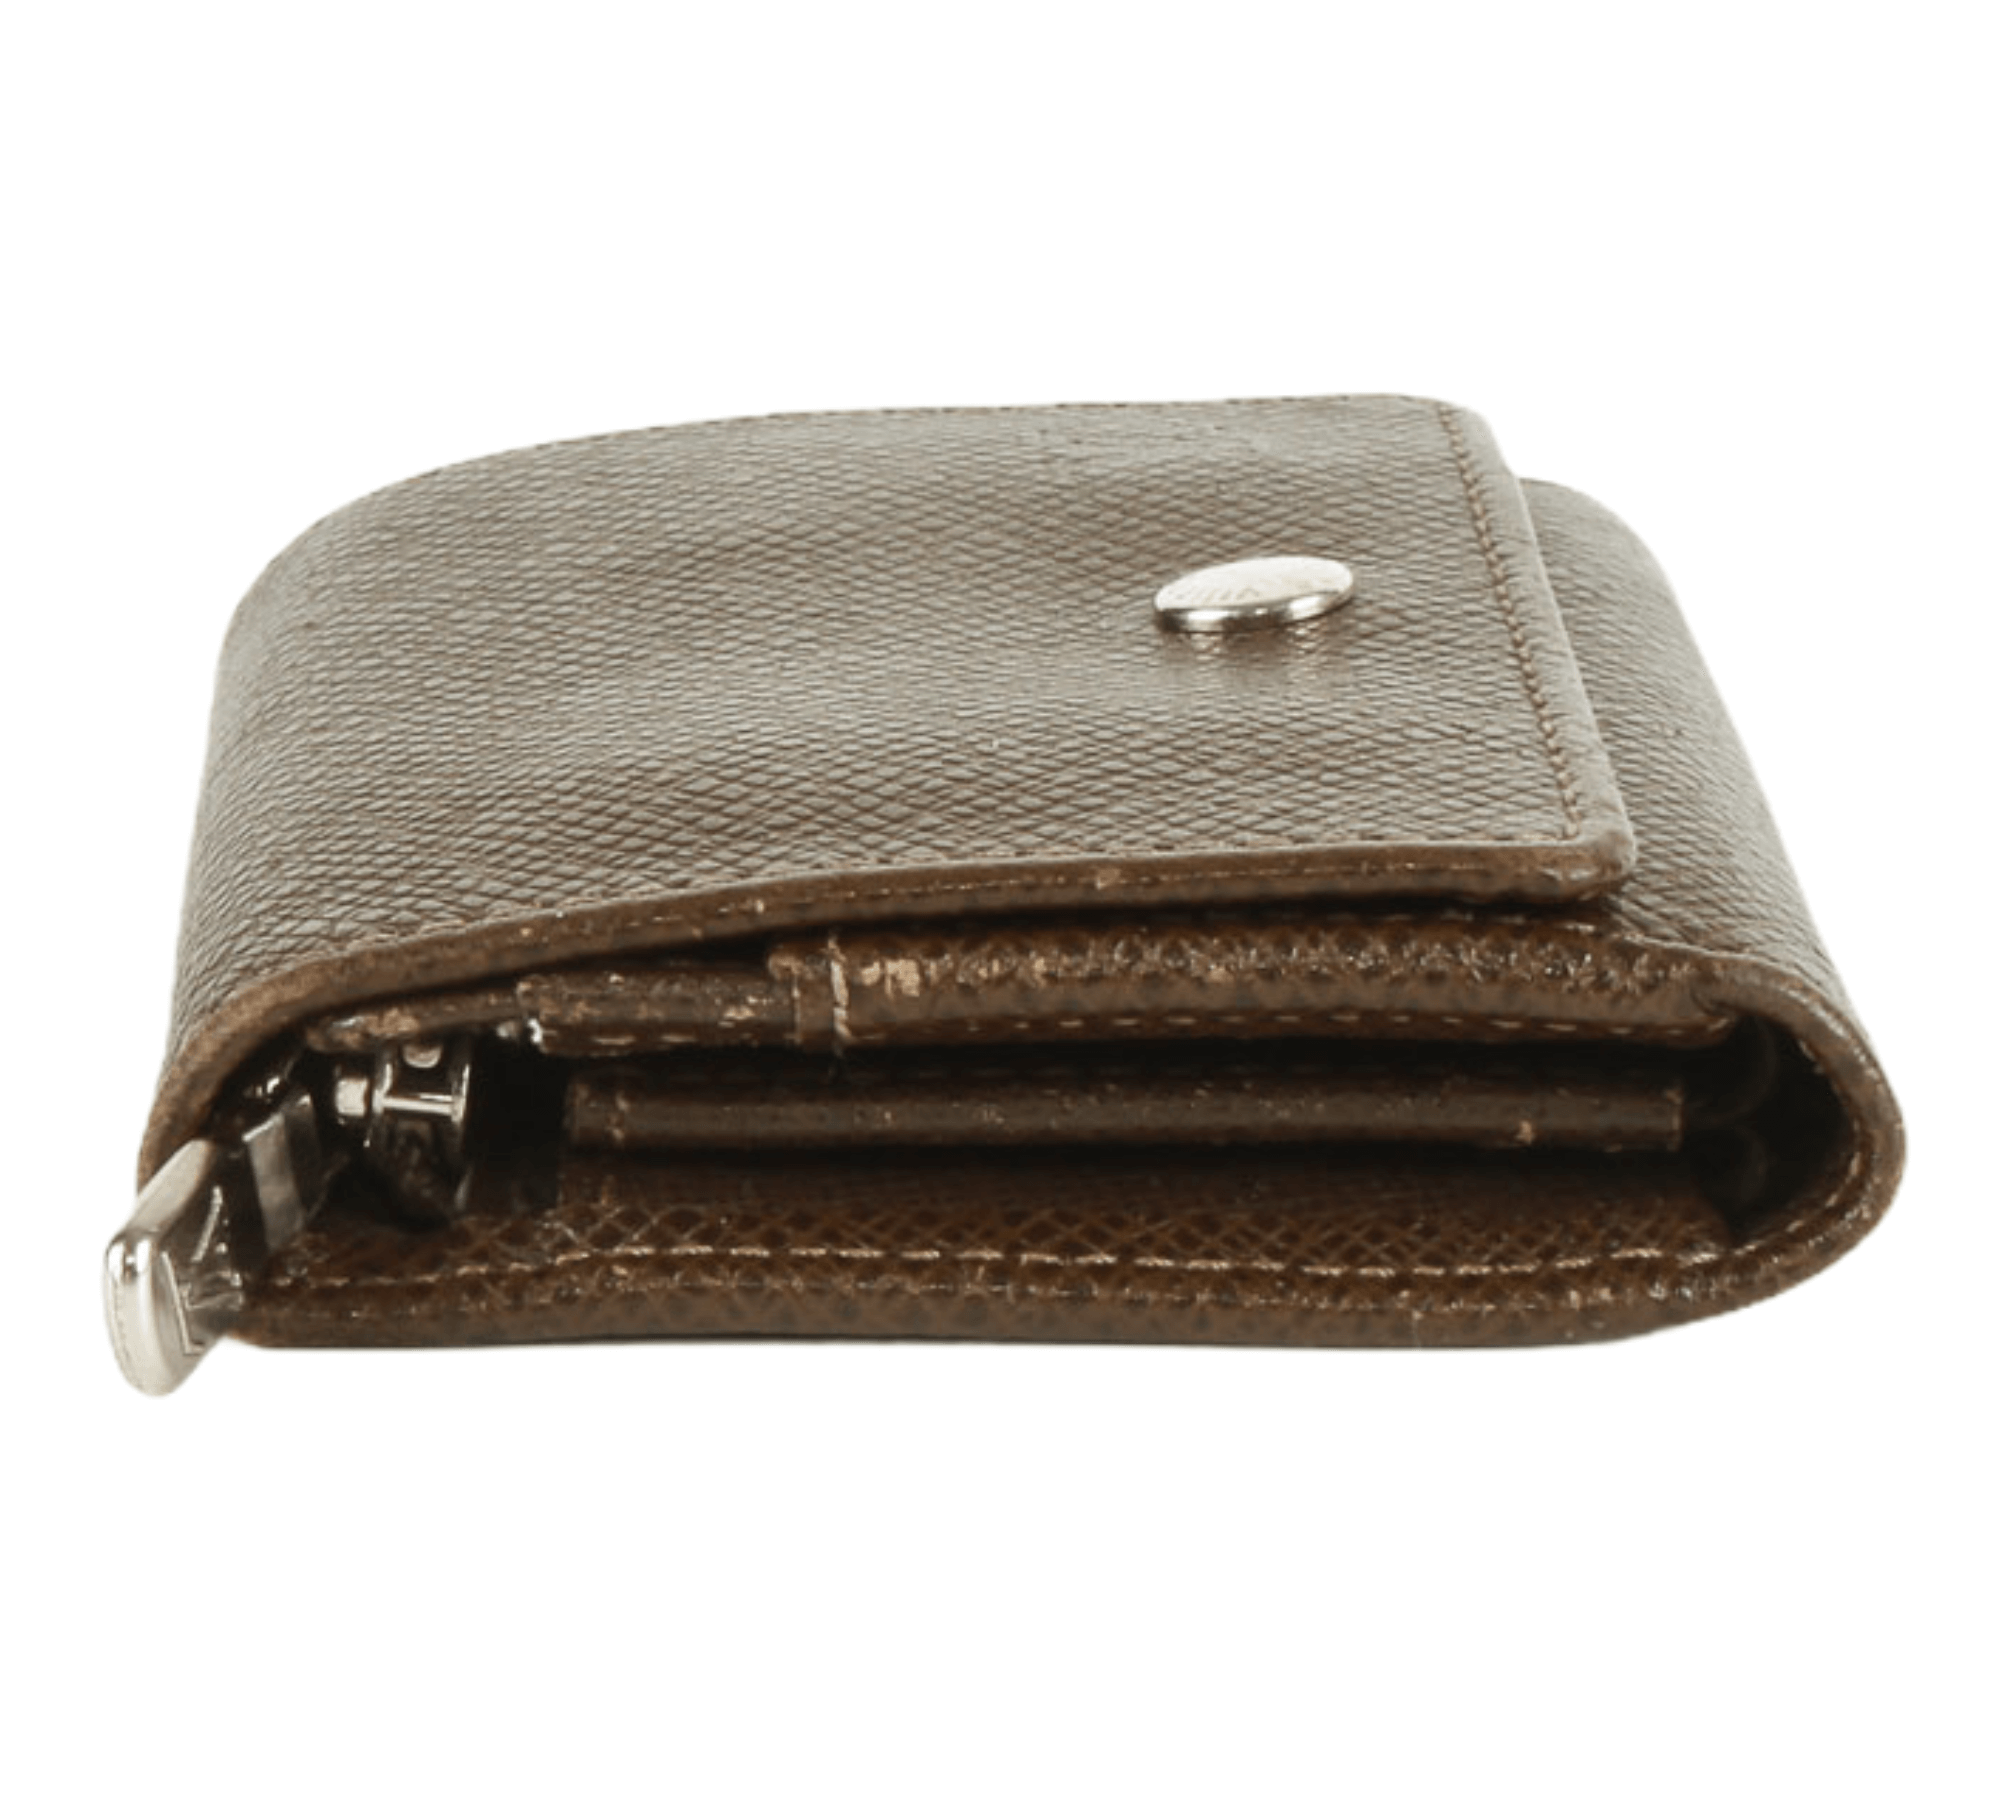 Marco Wallet Taiga Leather - Wallets and Small Leather Goods